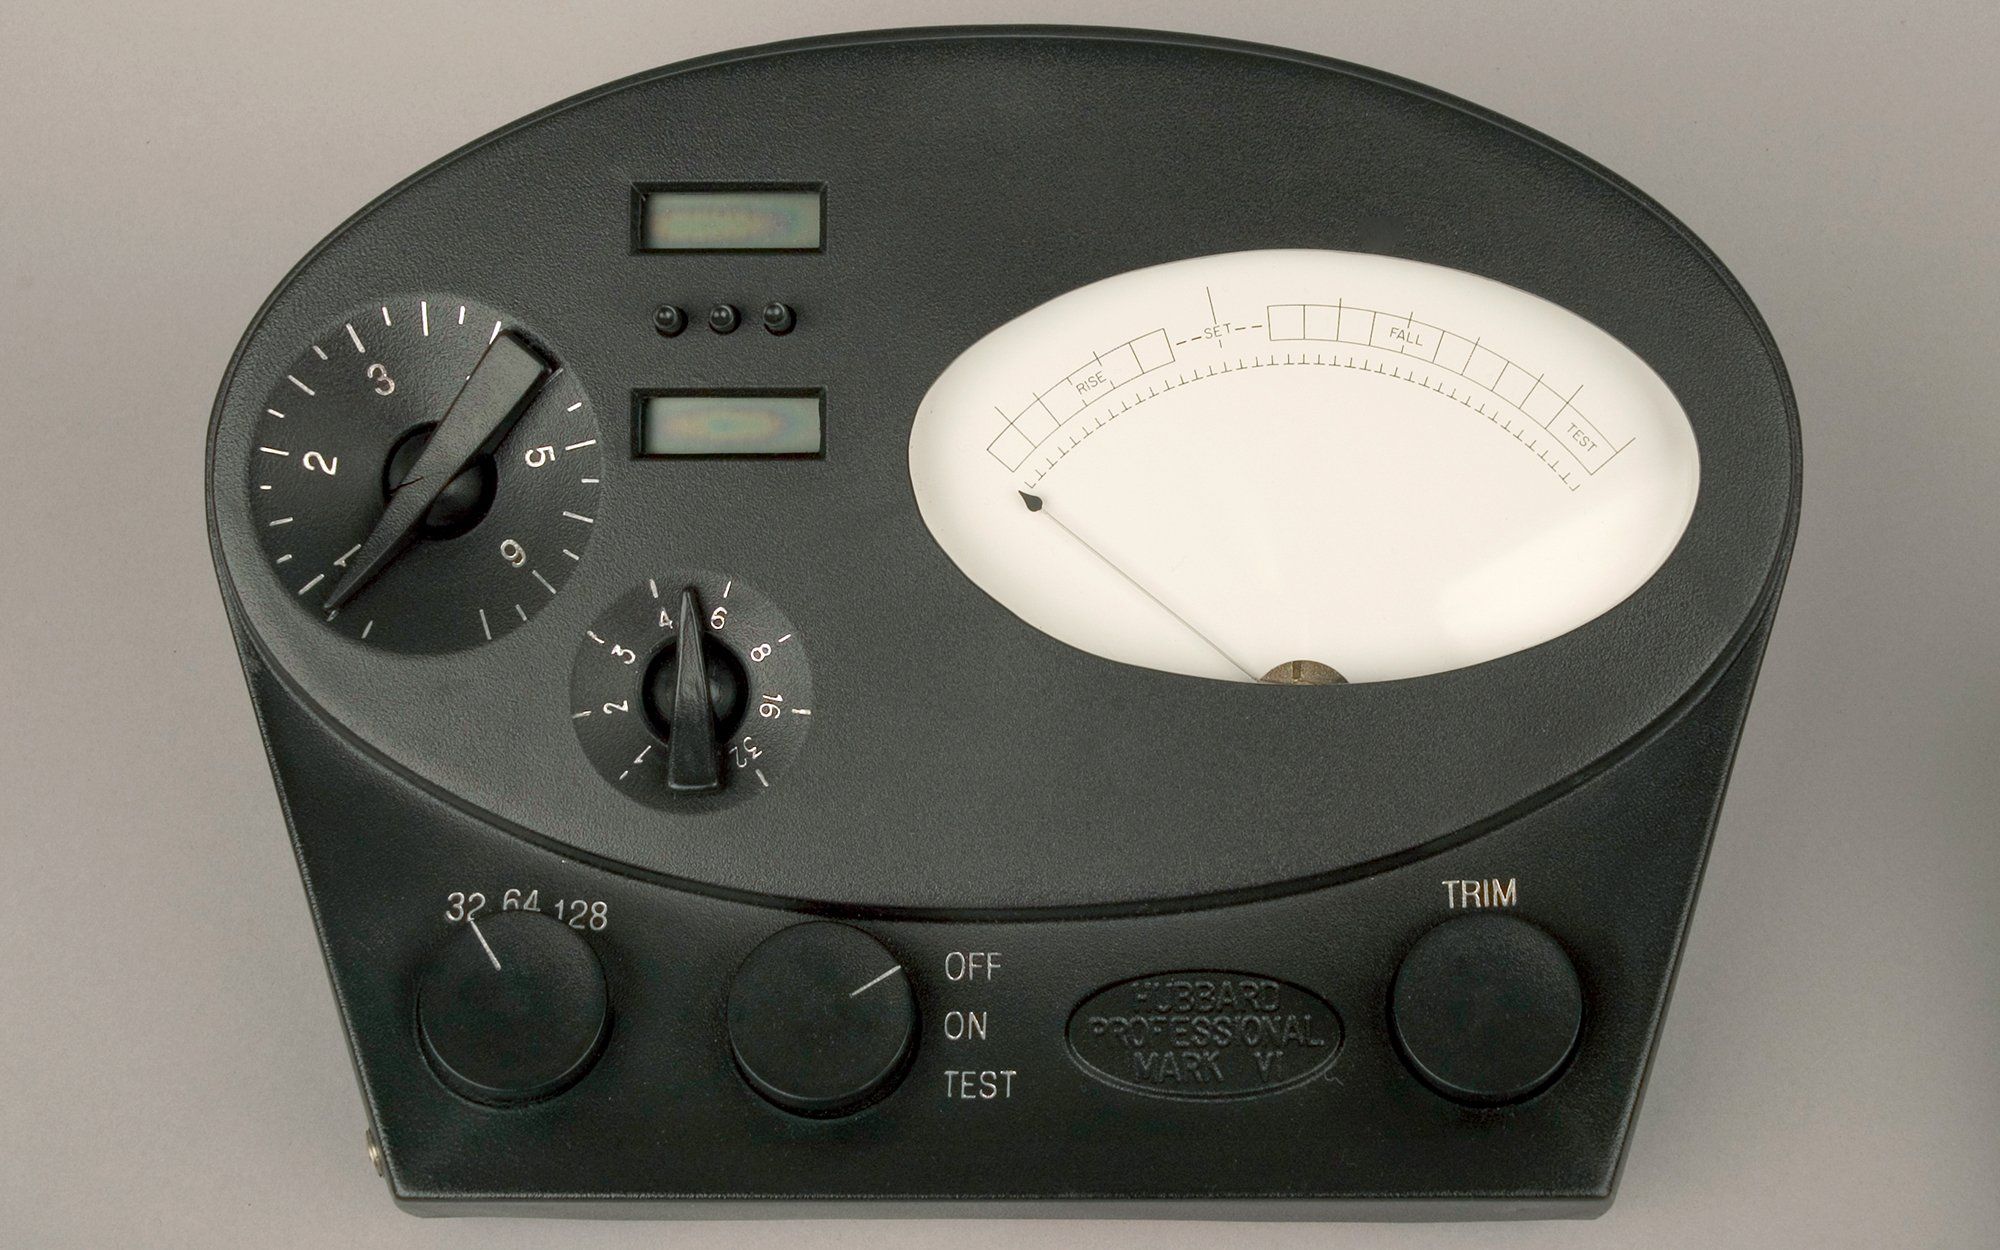 Photo of an electrical device with an oval meter and several dials.